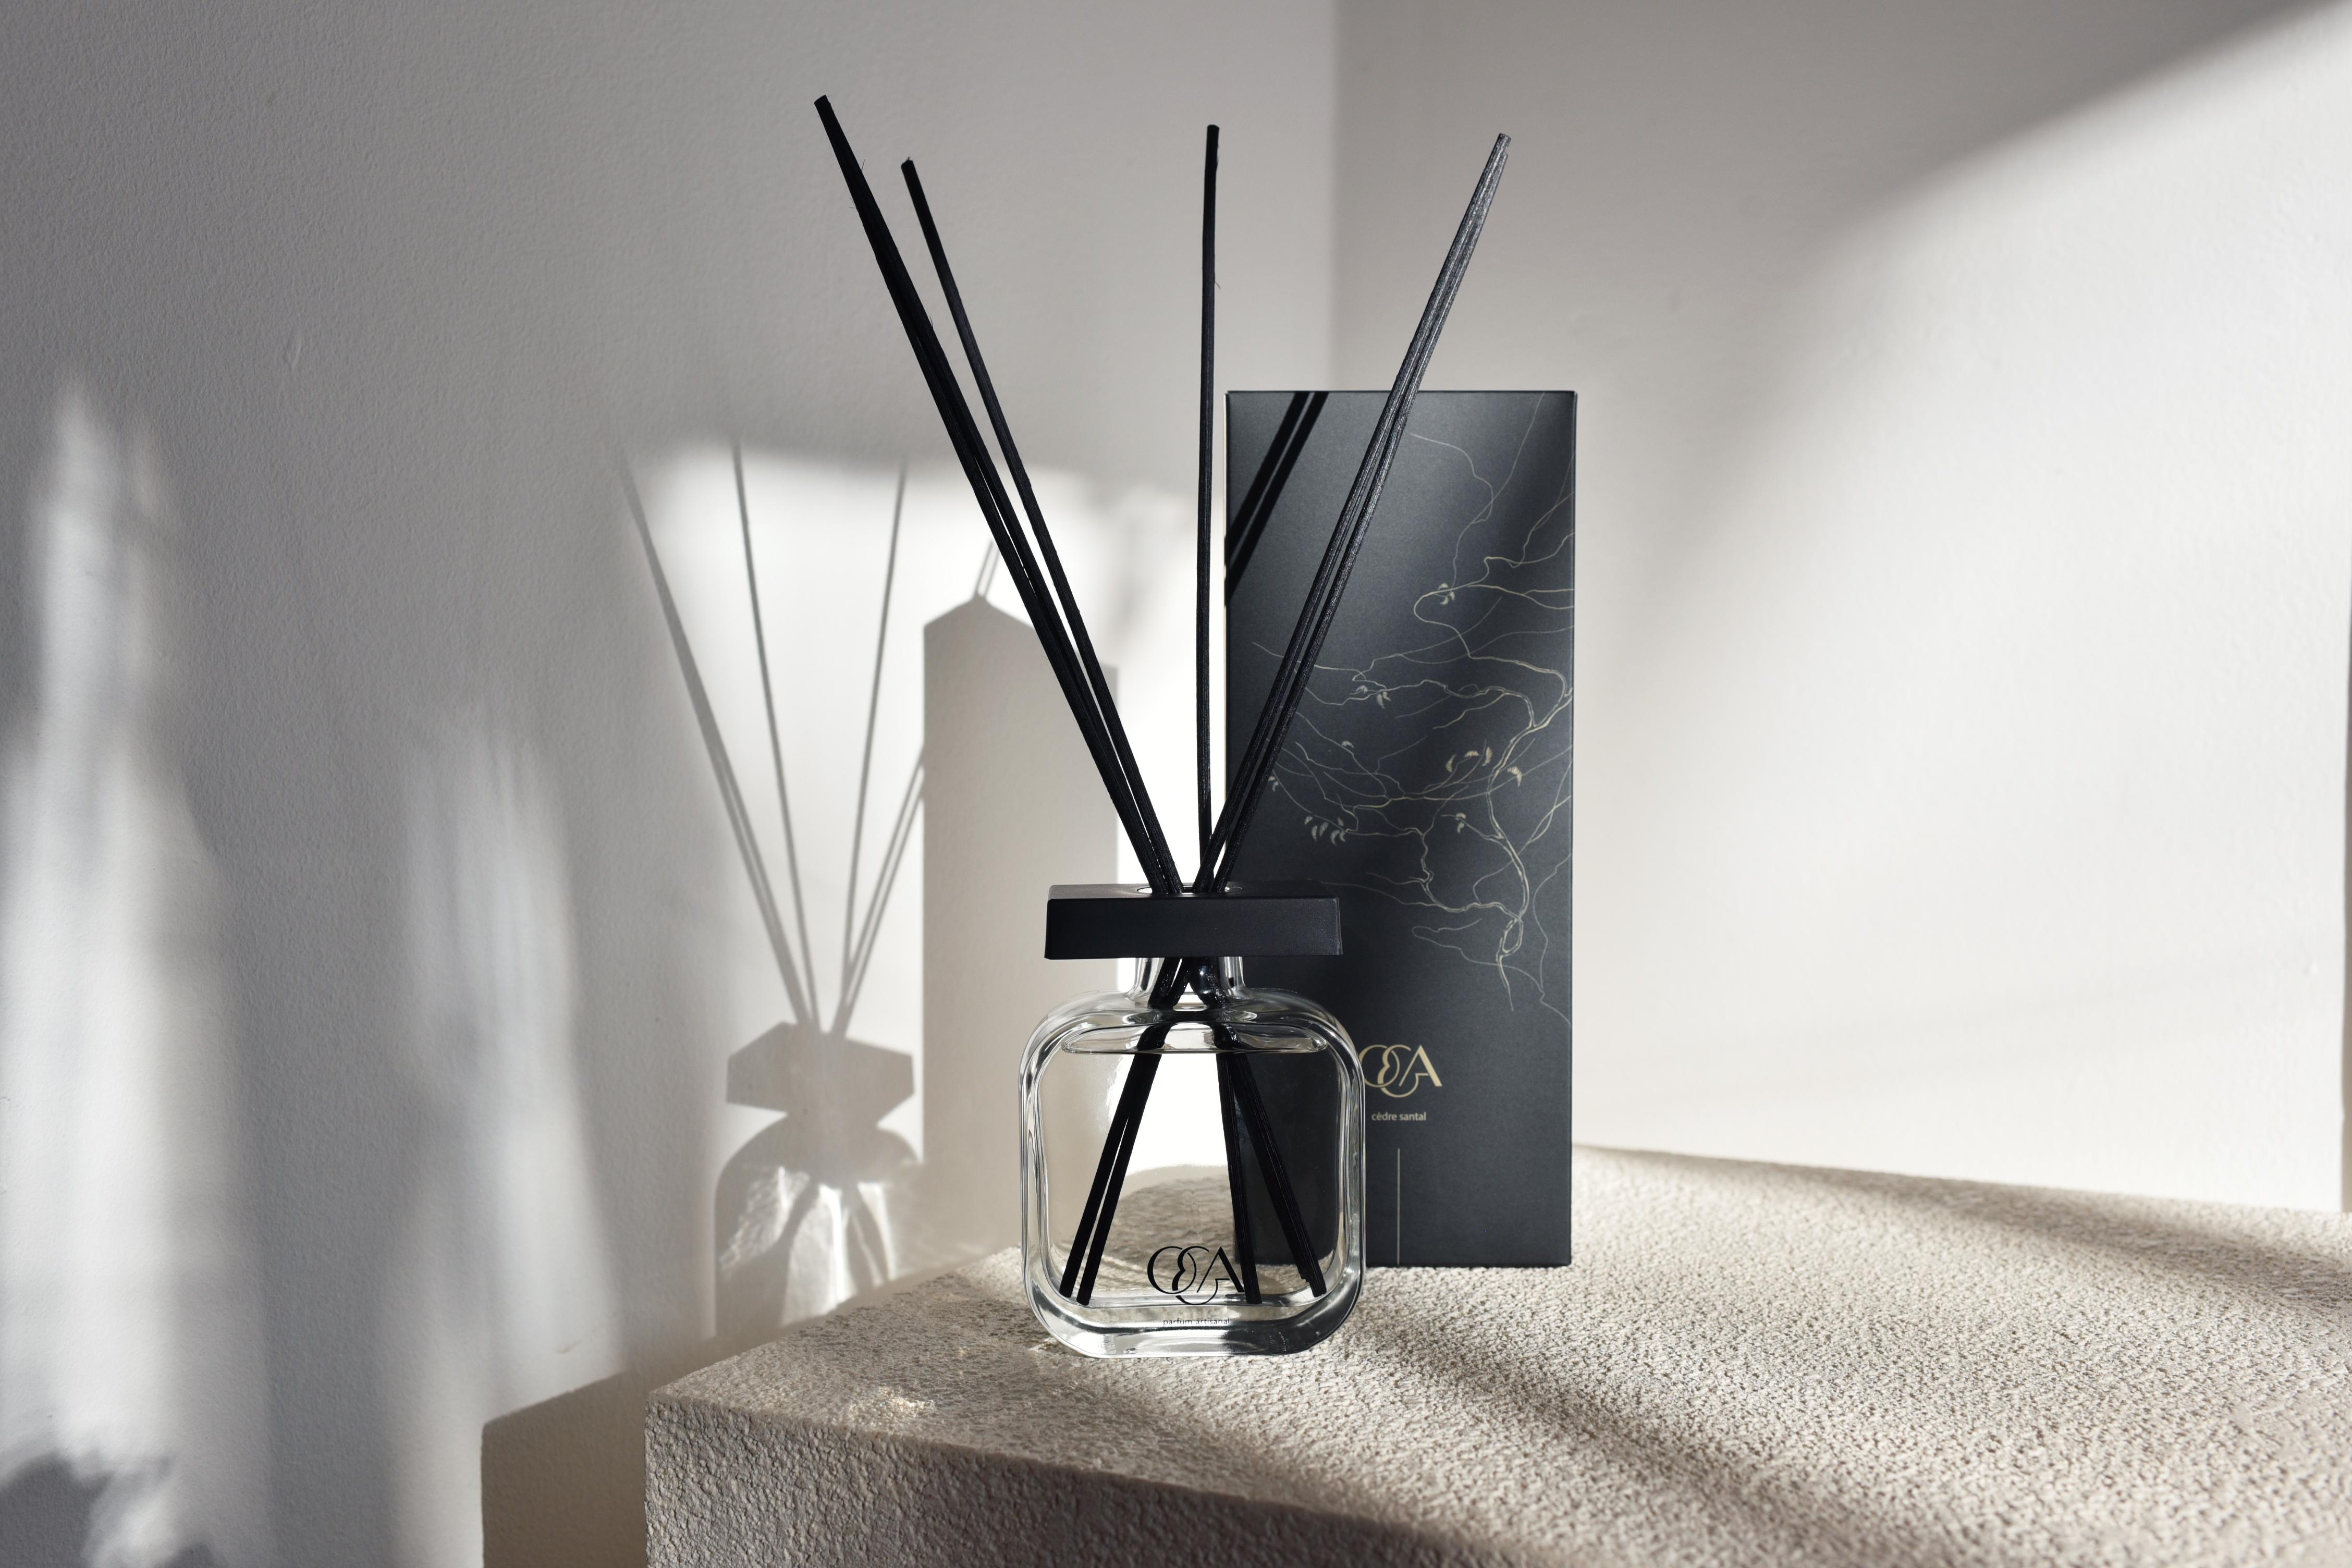 O&A London creates sophisticated scents for your home together with the best perfume houses in Grasse. Individually designed home diffusers will add an indelible impression of your home, literally in the air itself.

Top notes: green notes of fir